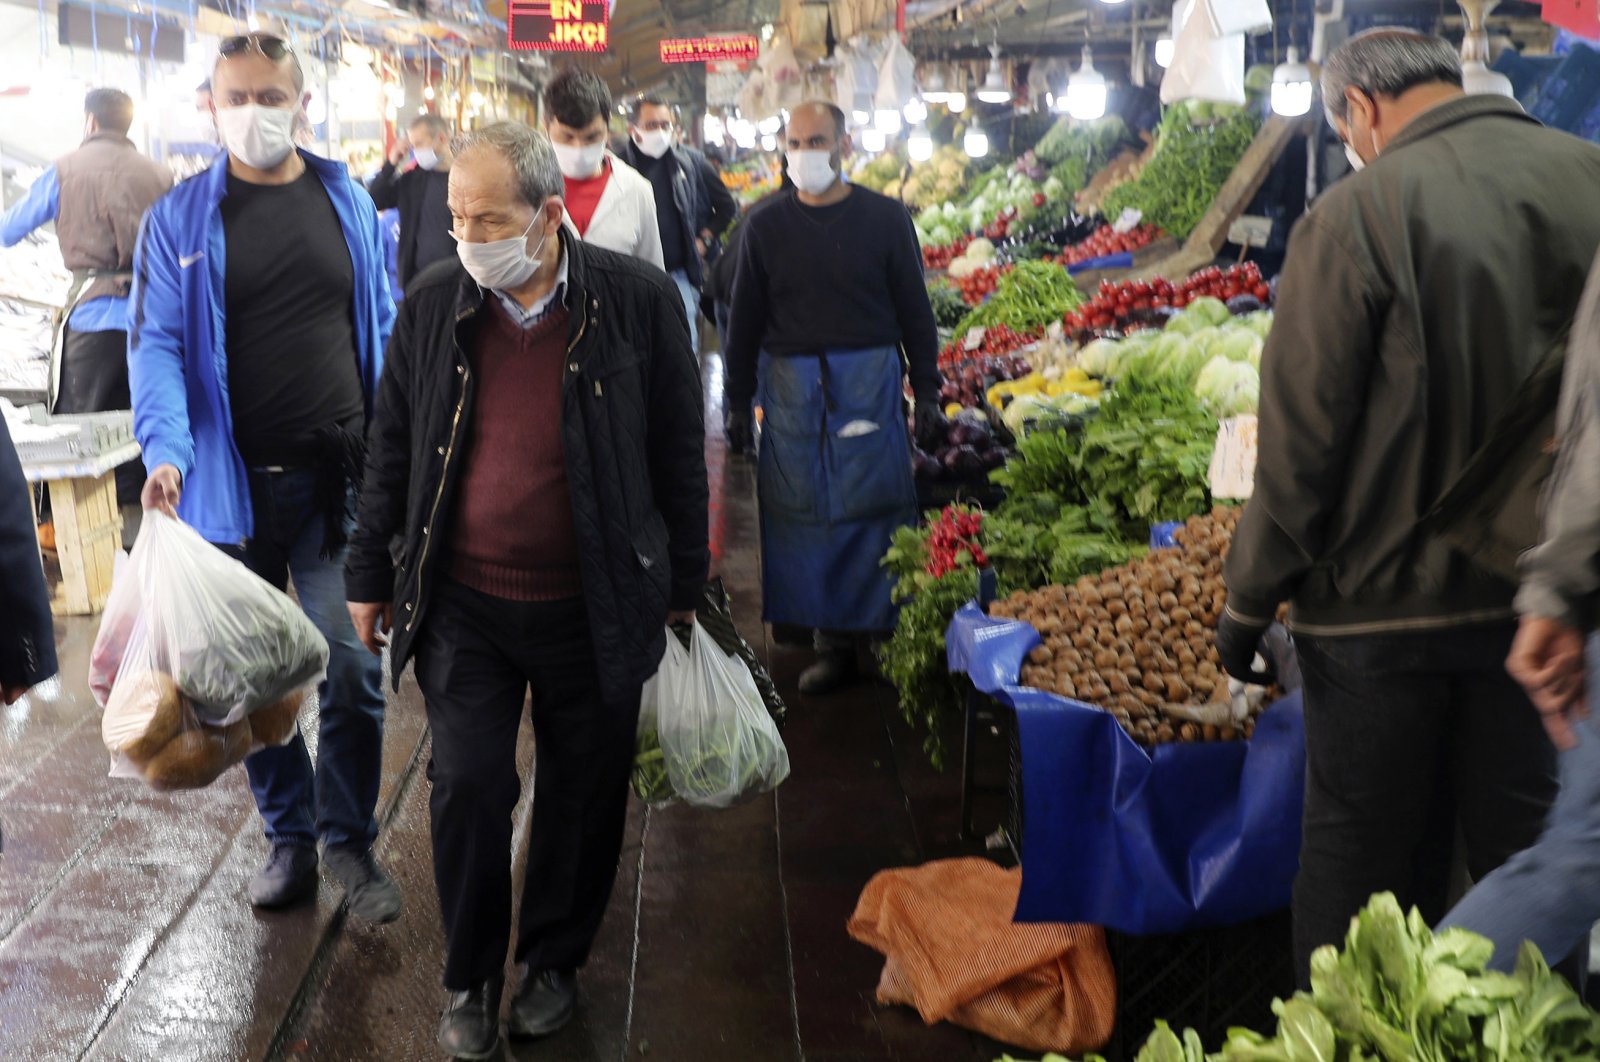 People wearing face masks leave a food market just hours before the start of a two-day curfew declared by the government in an attempt to slow down the spread of coronavirus, in Ankara, Turkey, Friday, April 17, 2020. (AP Photo)